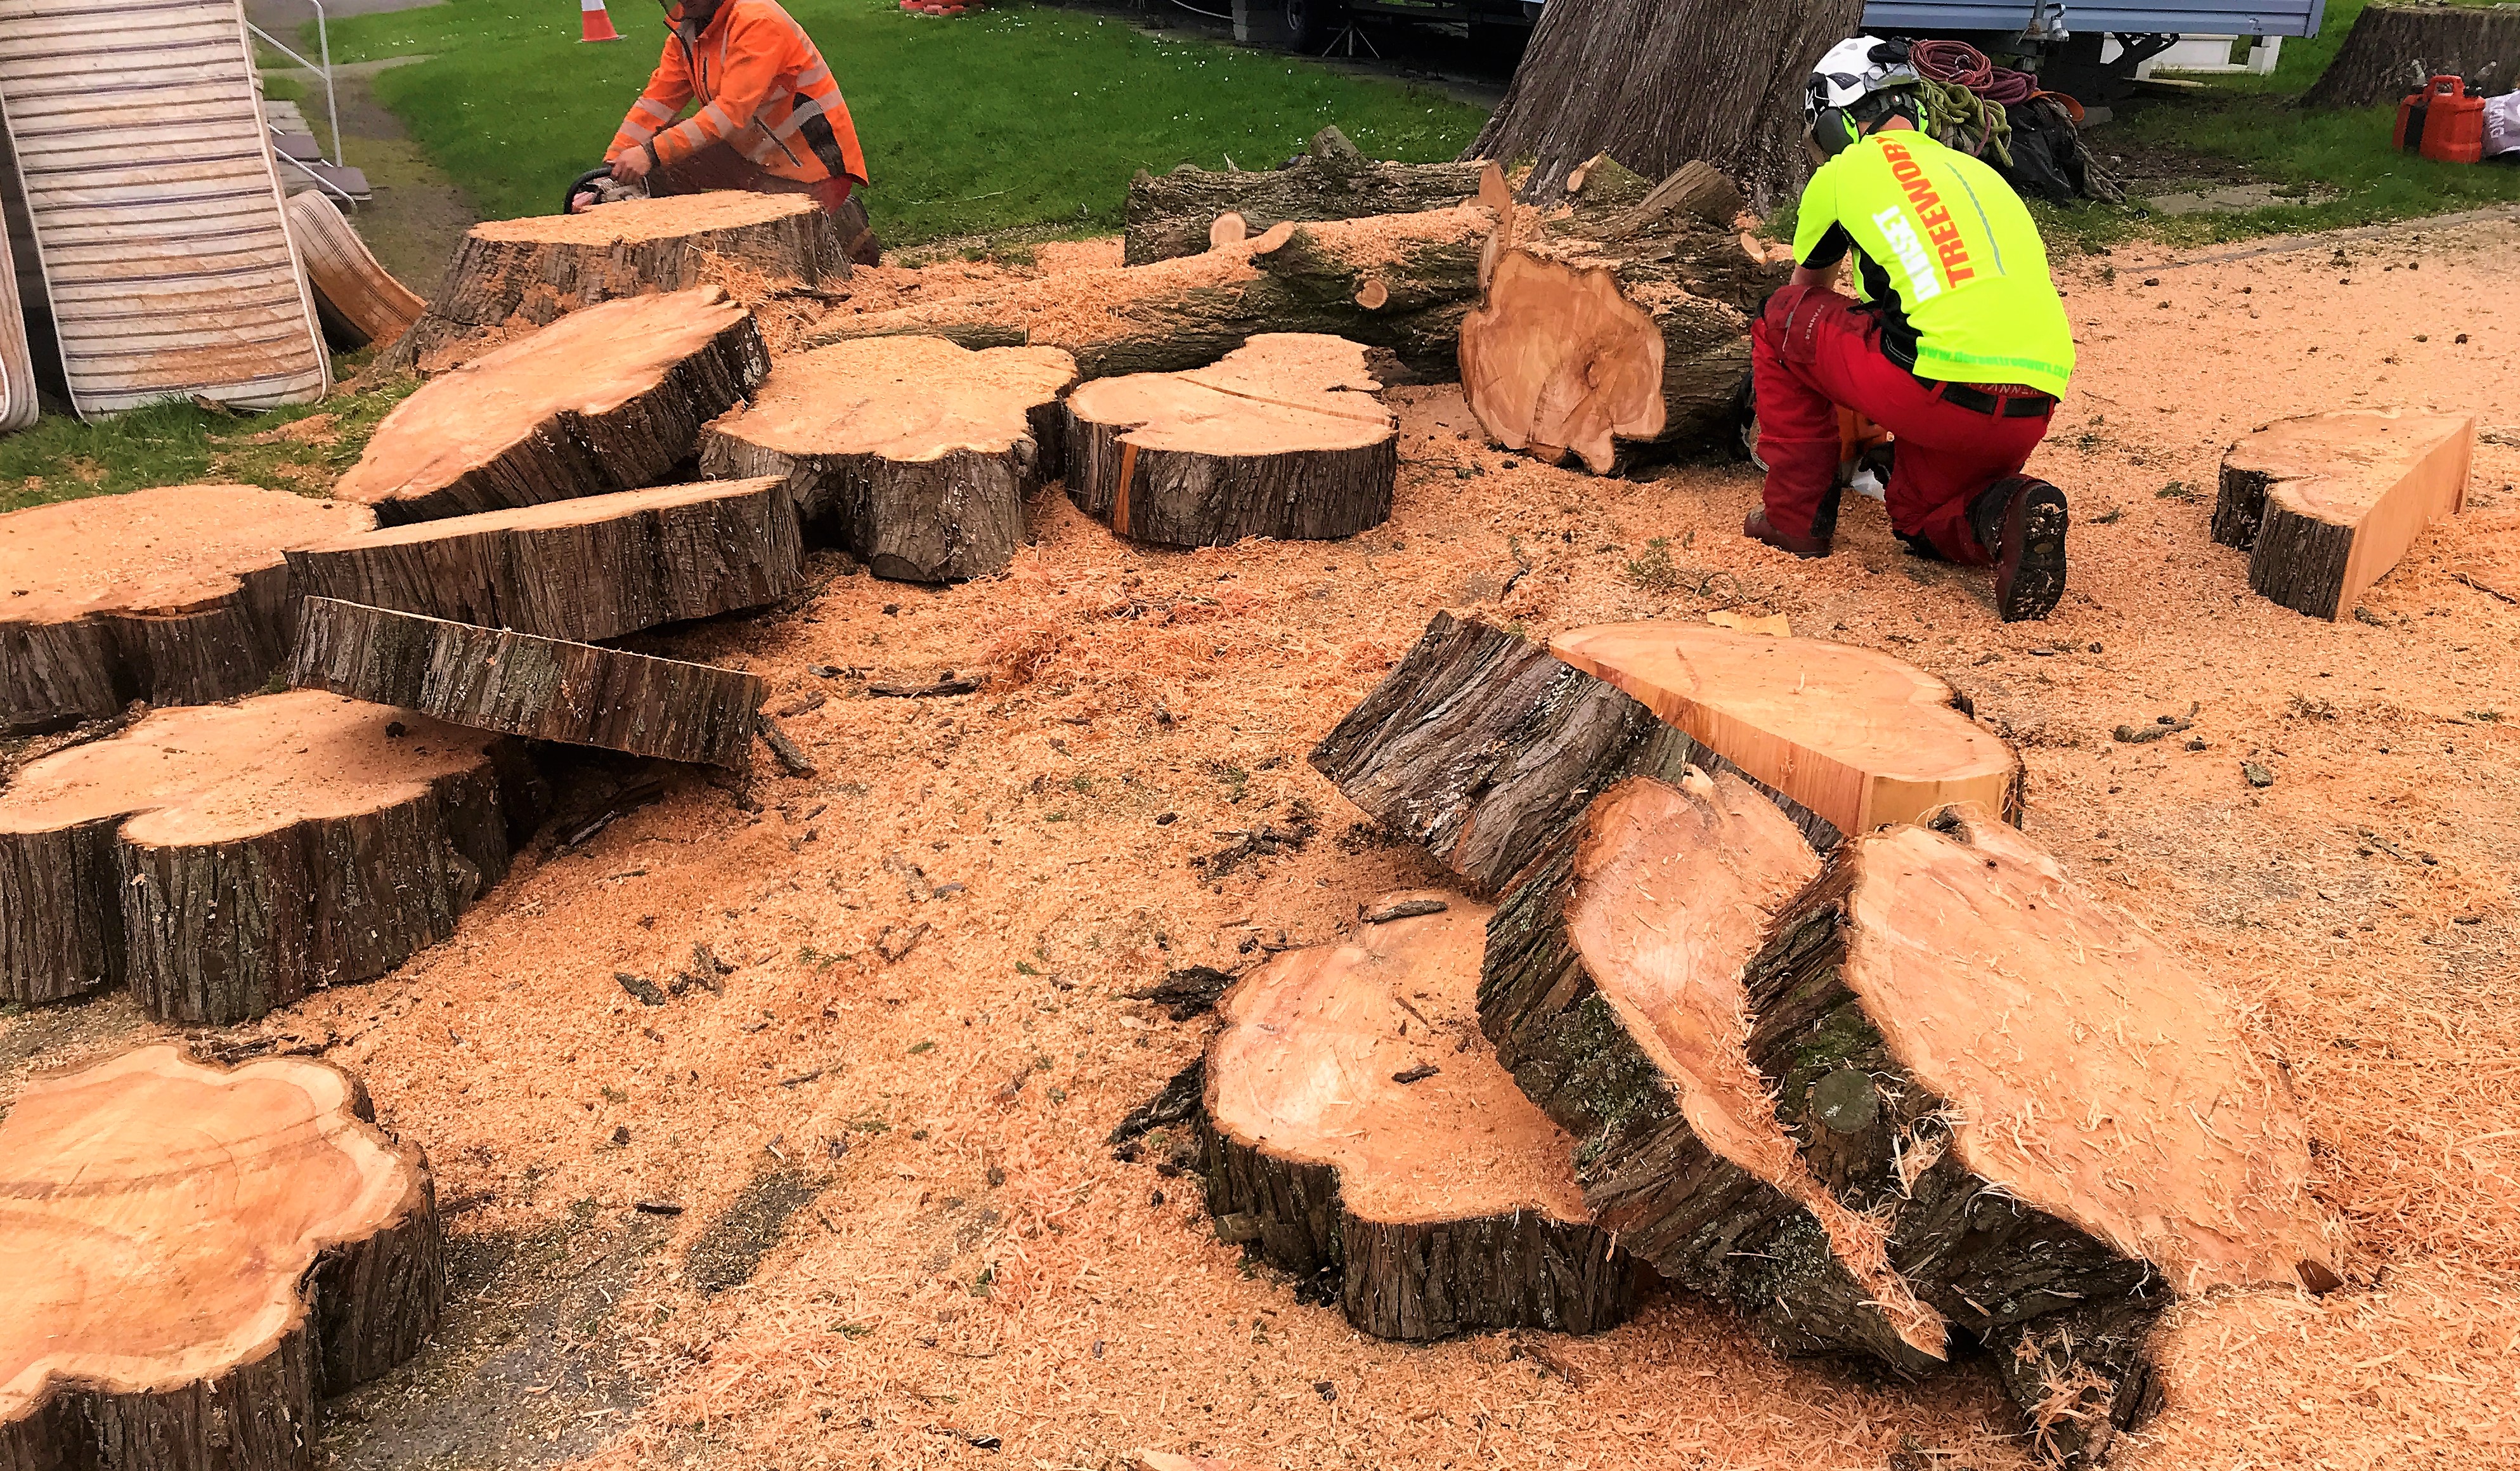 Weymouth Tree Surgeon | Tree surgeon & Arborists in Weymouth & Portland, Dorchester  - tree care, tree removal, hedge trimming, hedge removal, stump grinding service.